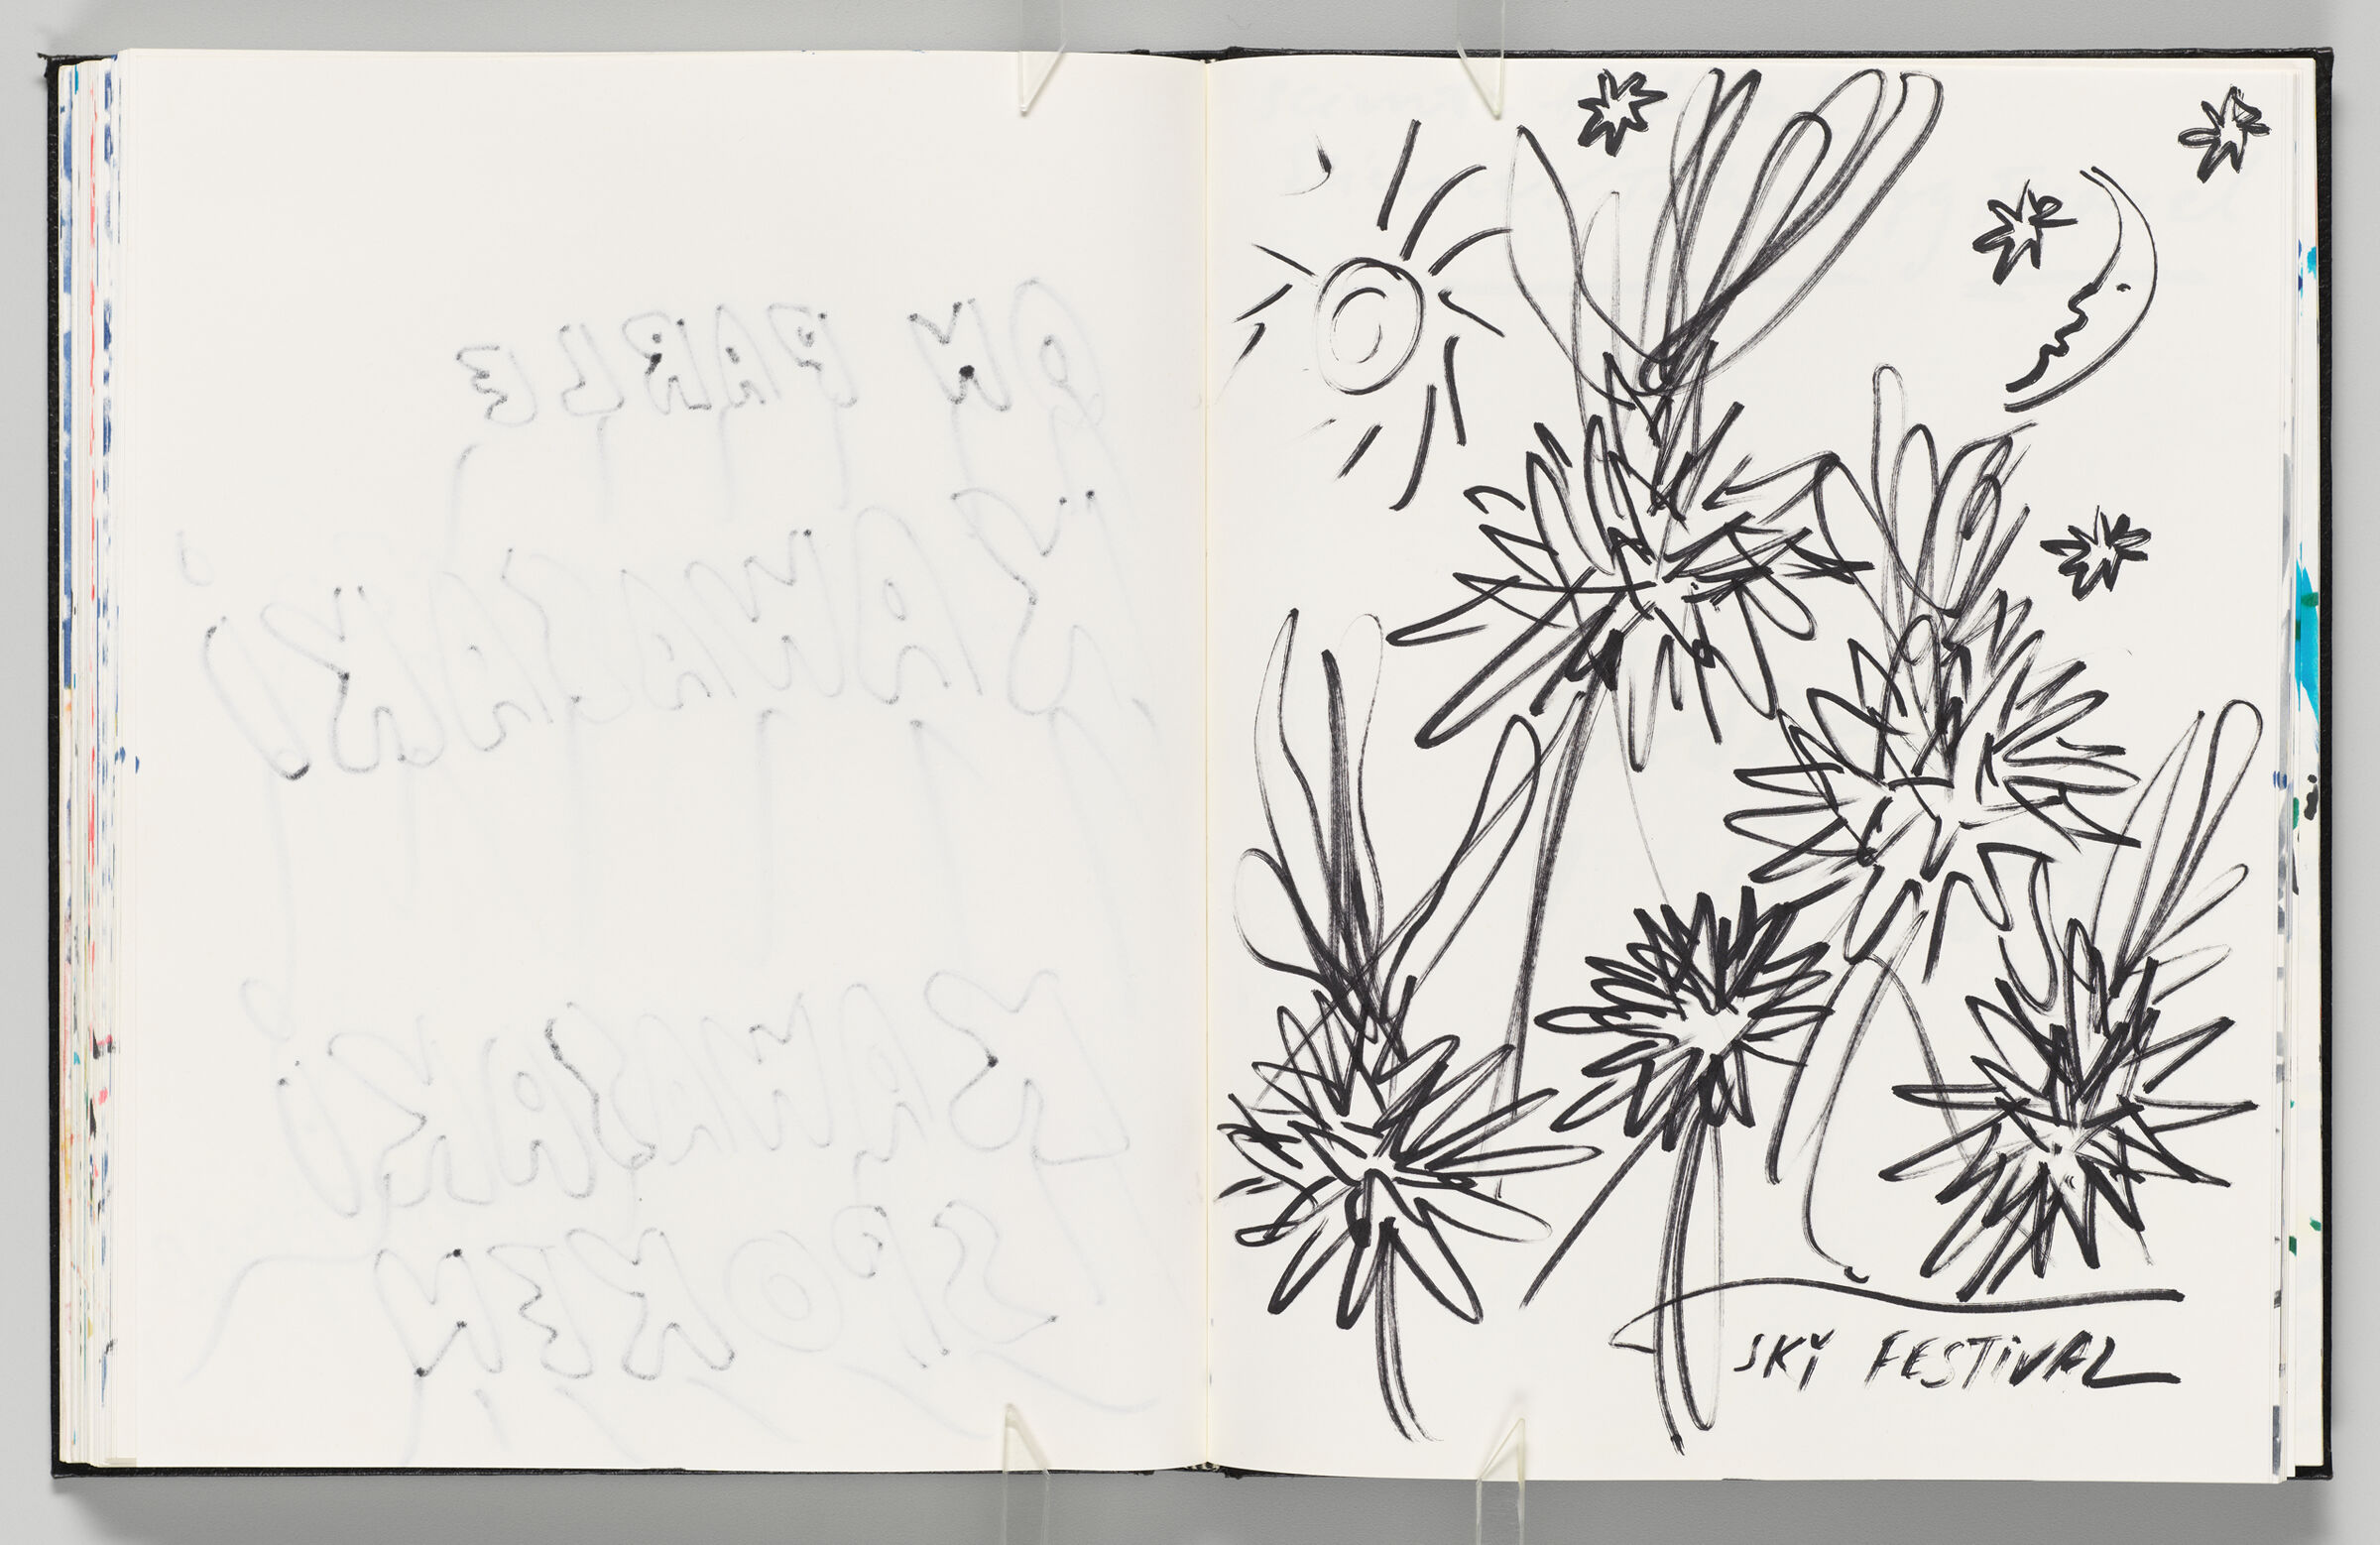 Untitled (Bleed-Through Of Previous Page, Left Page); Untitled (Designs For Sky Festival, Right Page)